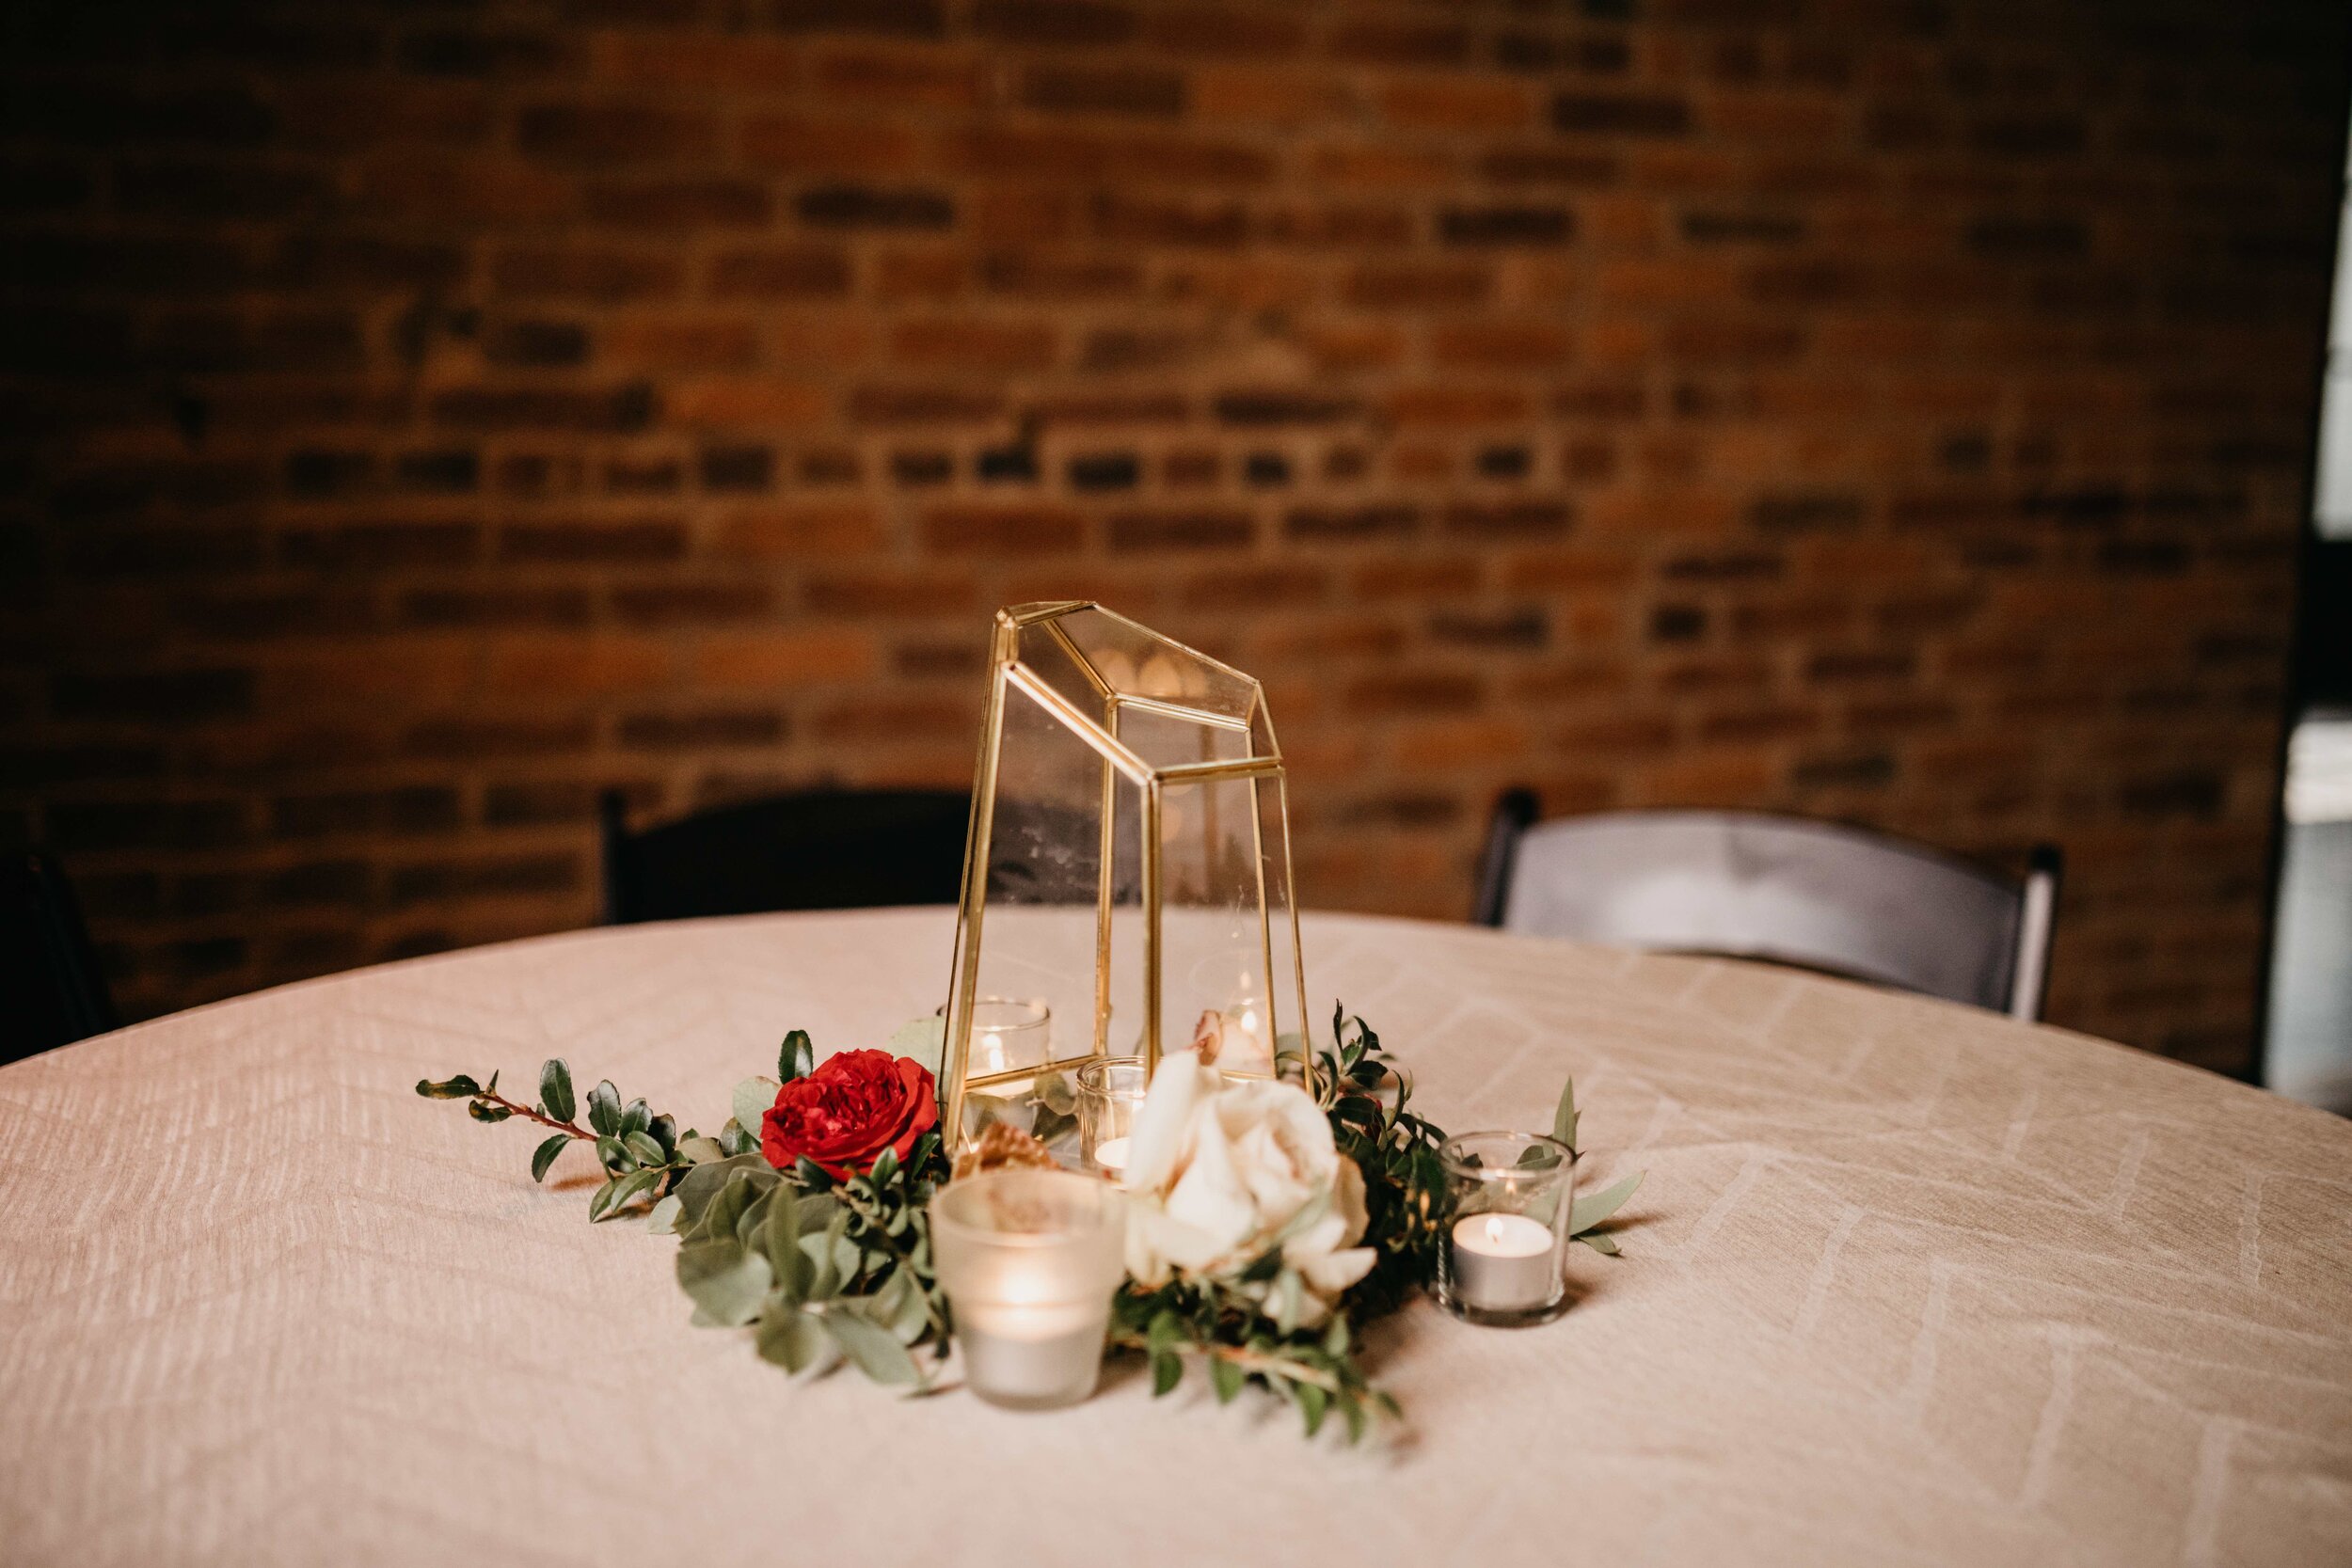 Geometric gold lantern surrounded by autumnal flowers and greenery. Nashville wedding floral design by Rosemary & Finch.